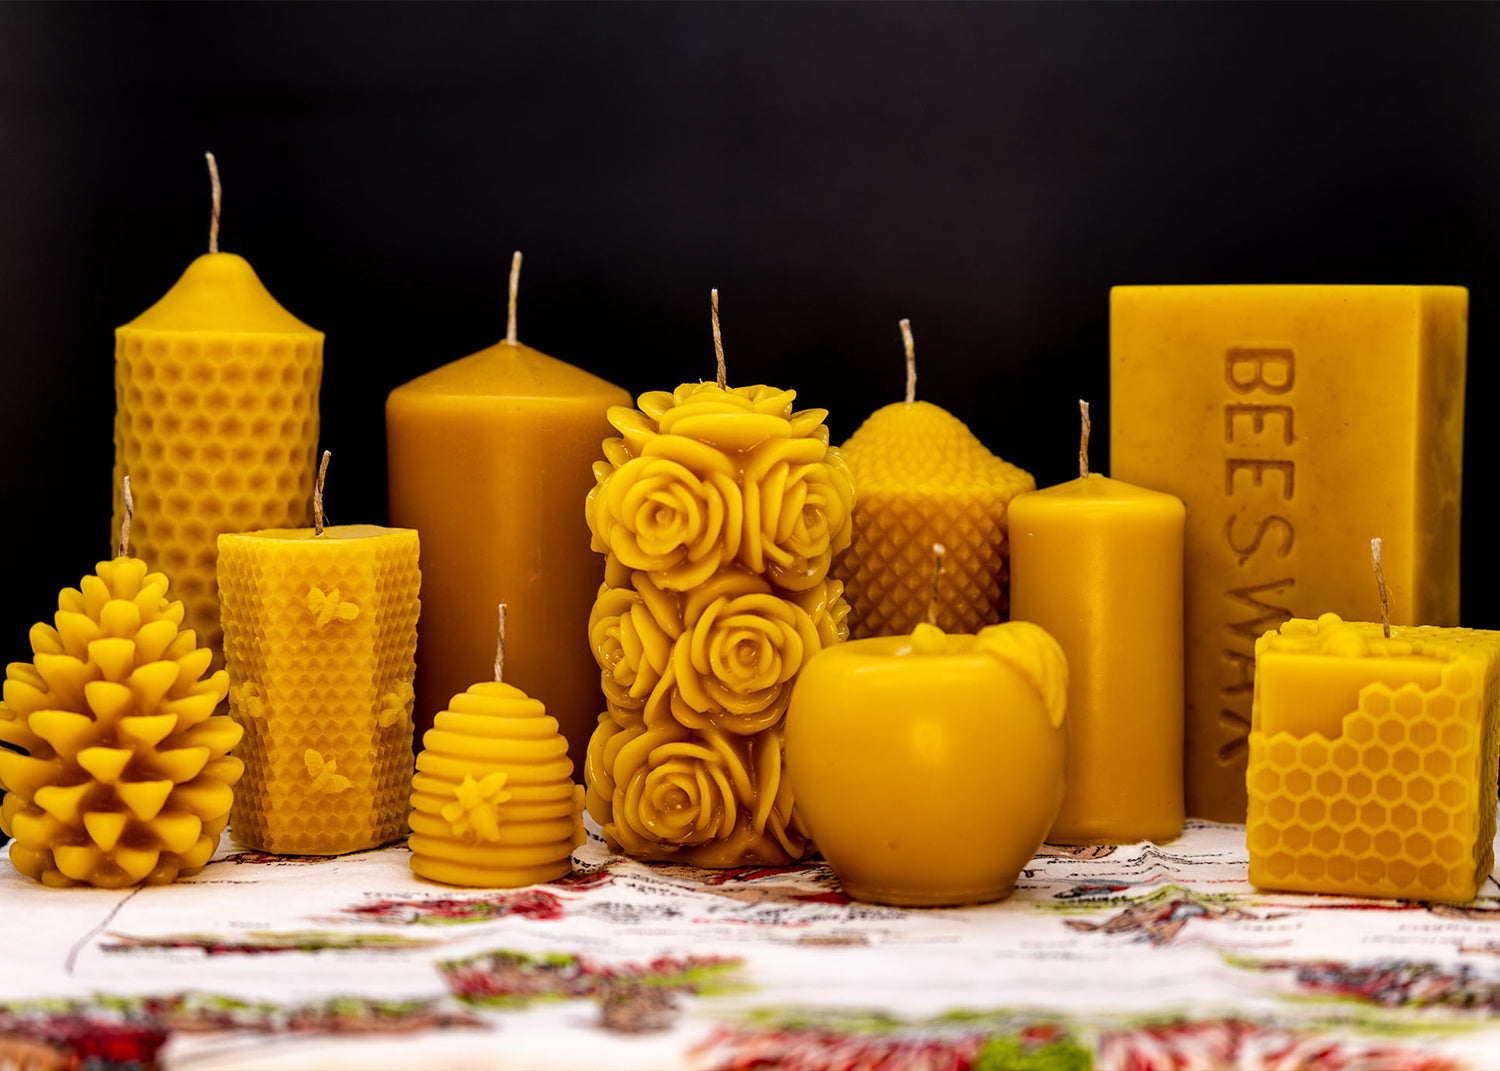 Beeswax candles - beeswax candles - beeswax candles - bees.